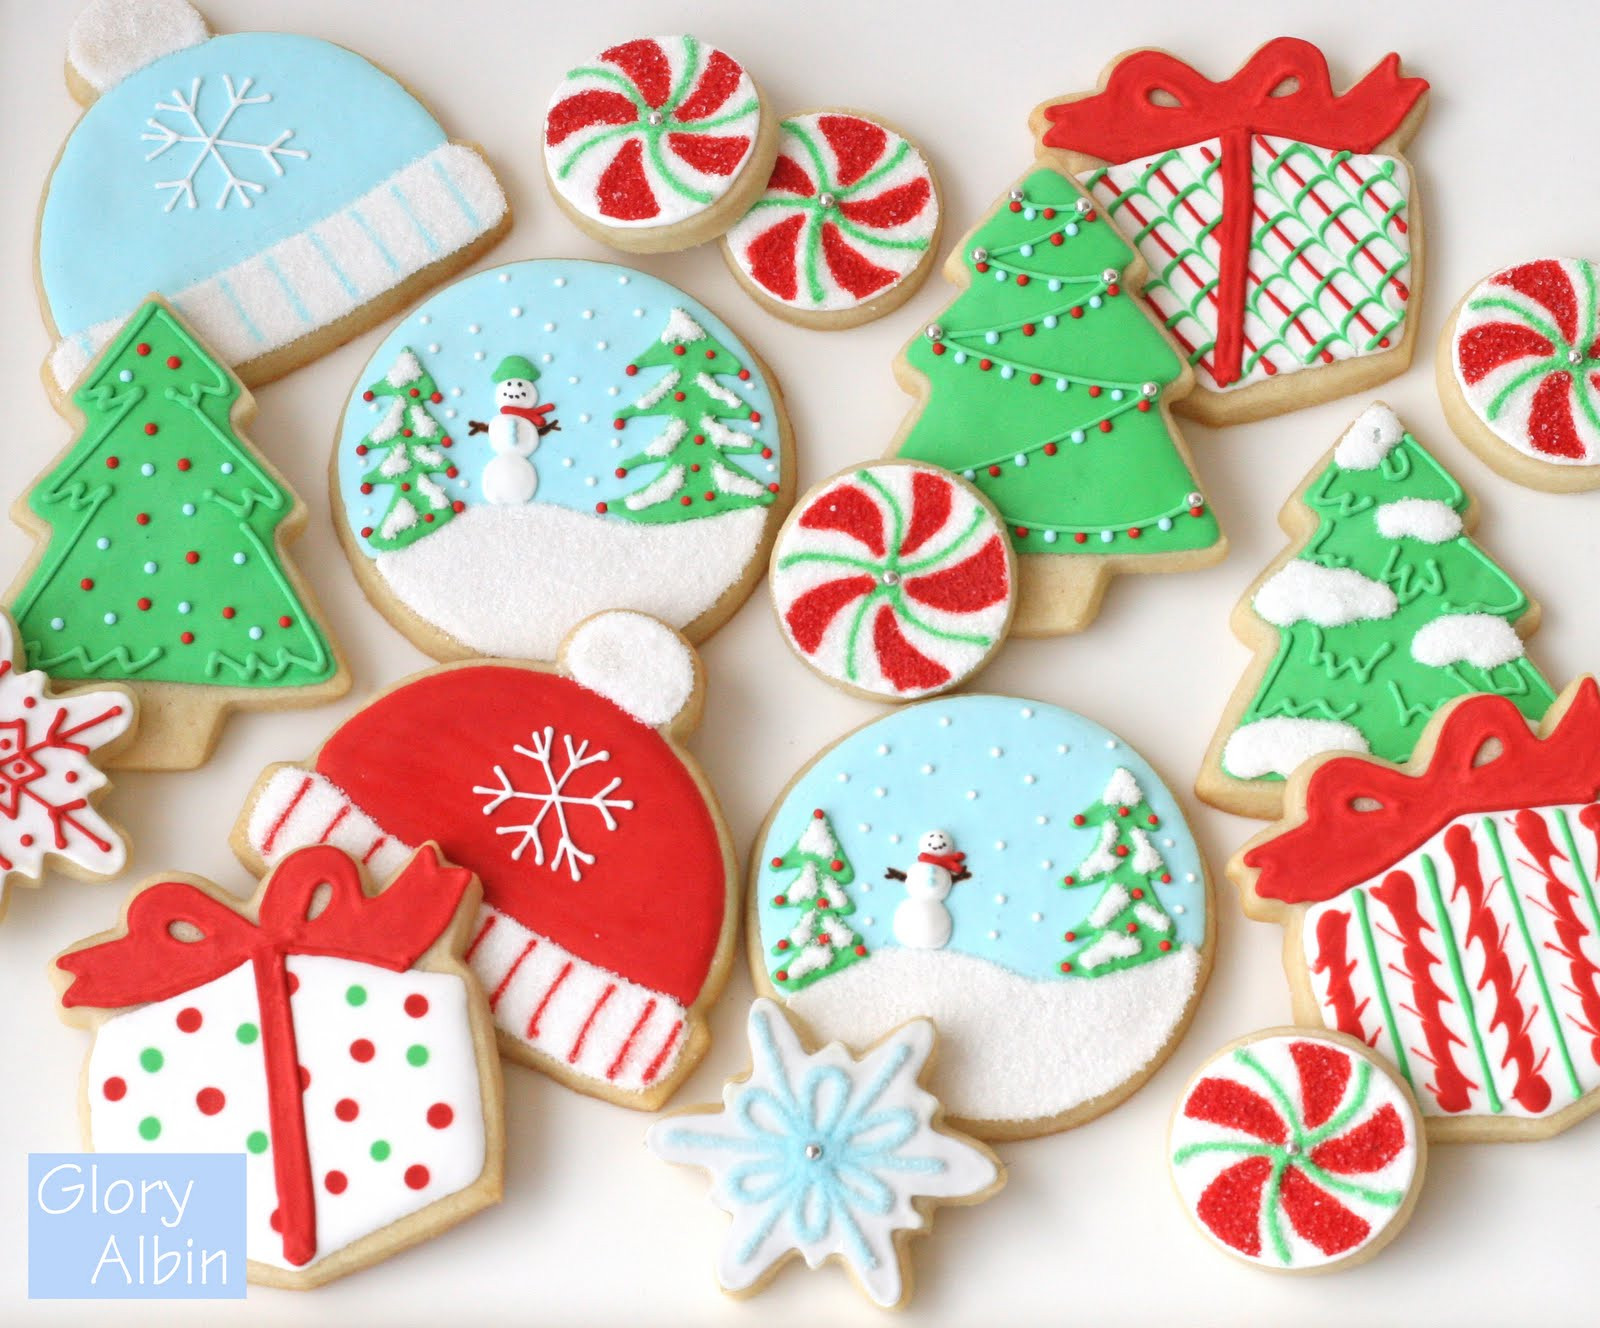 Cookie Decorating Icing Recipe
 Decorating Sugar Cookies with Royal Icing – Glorious Treats